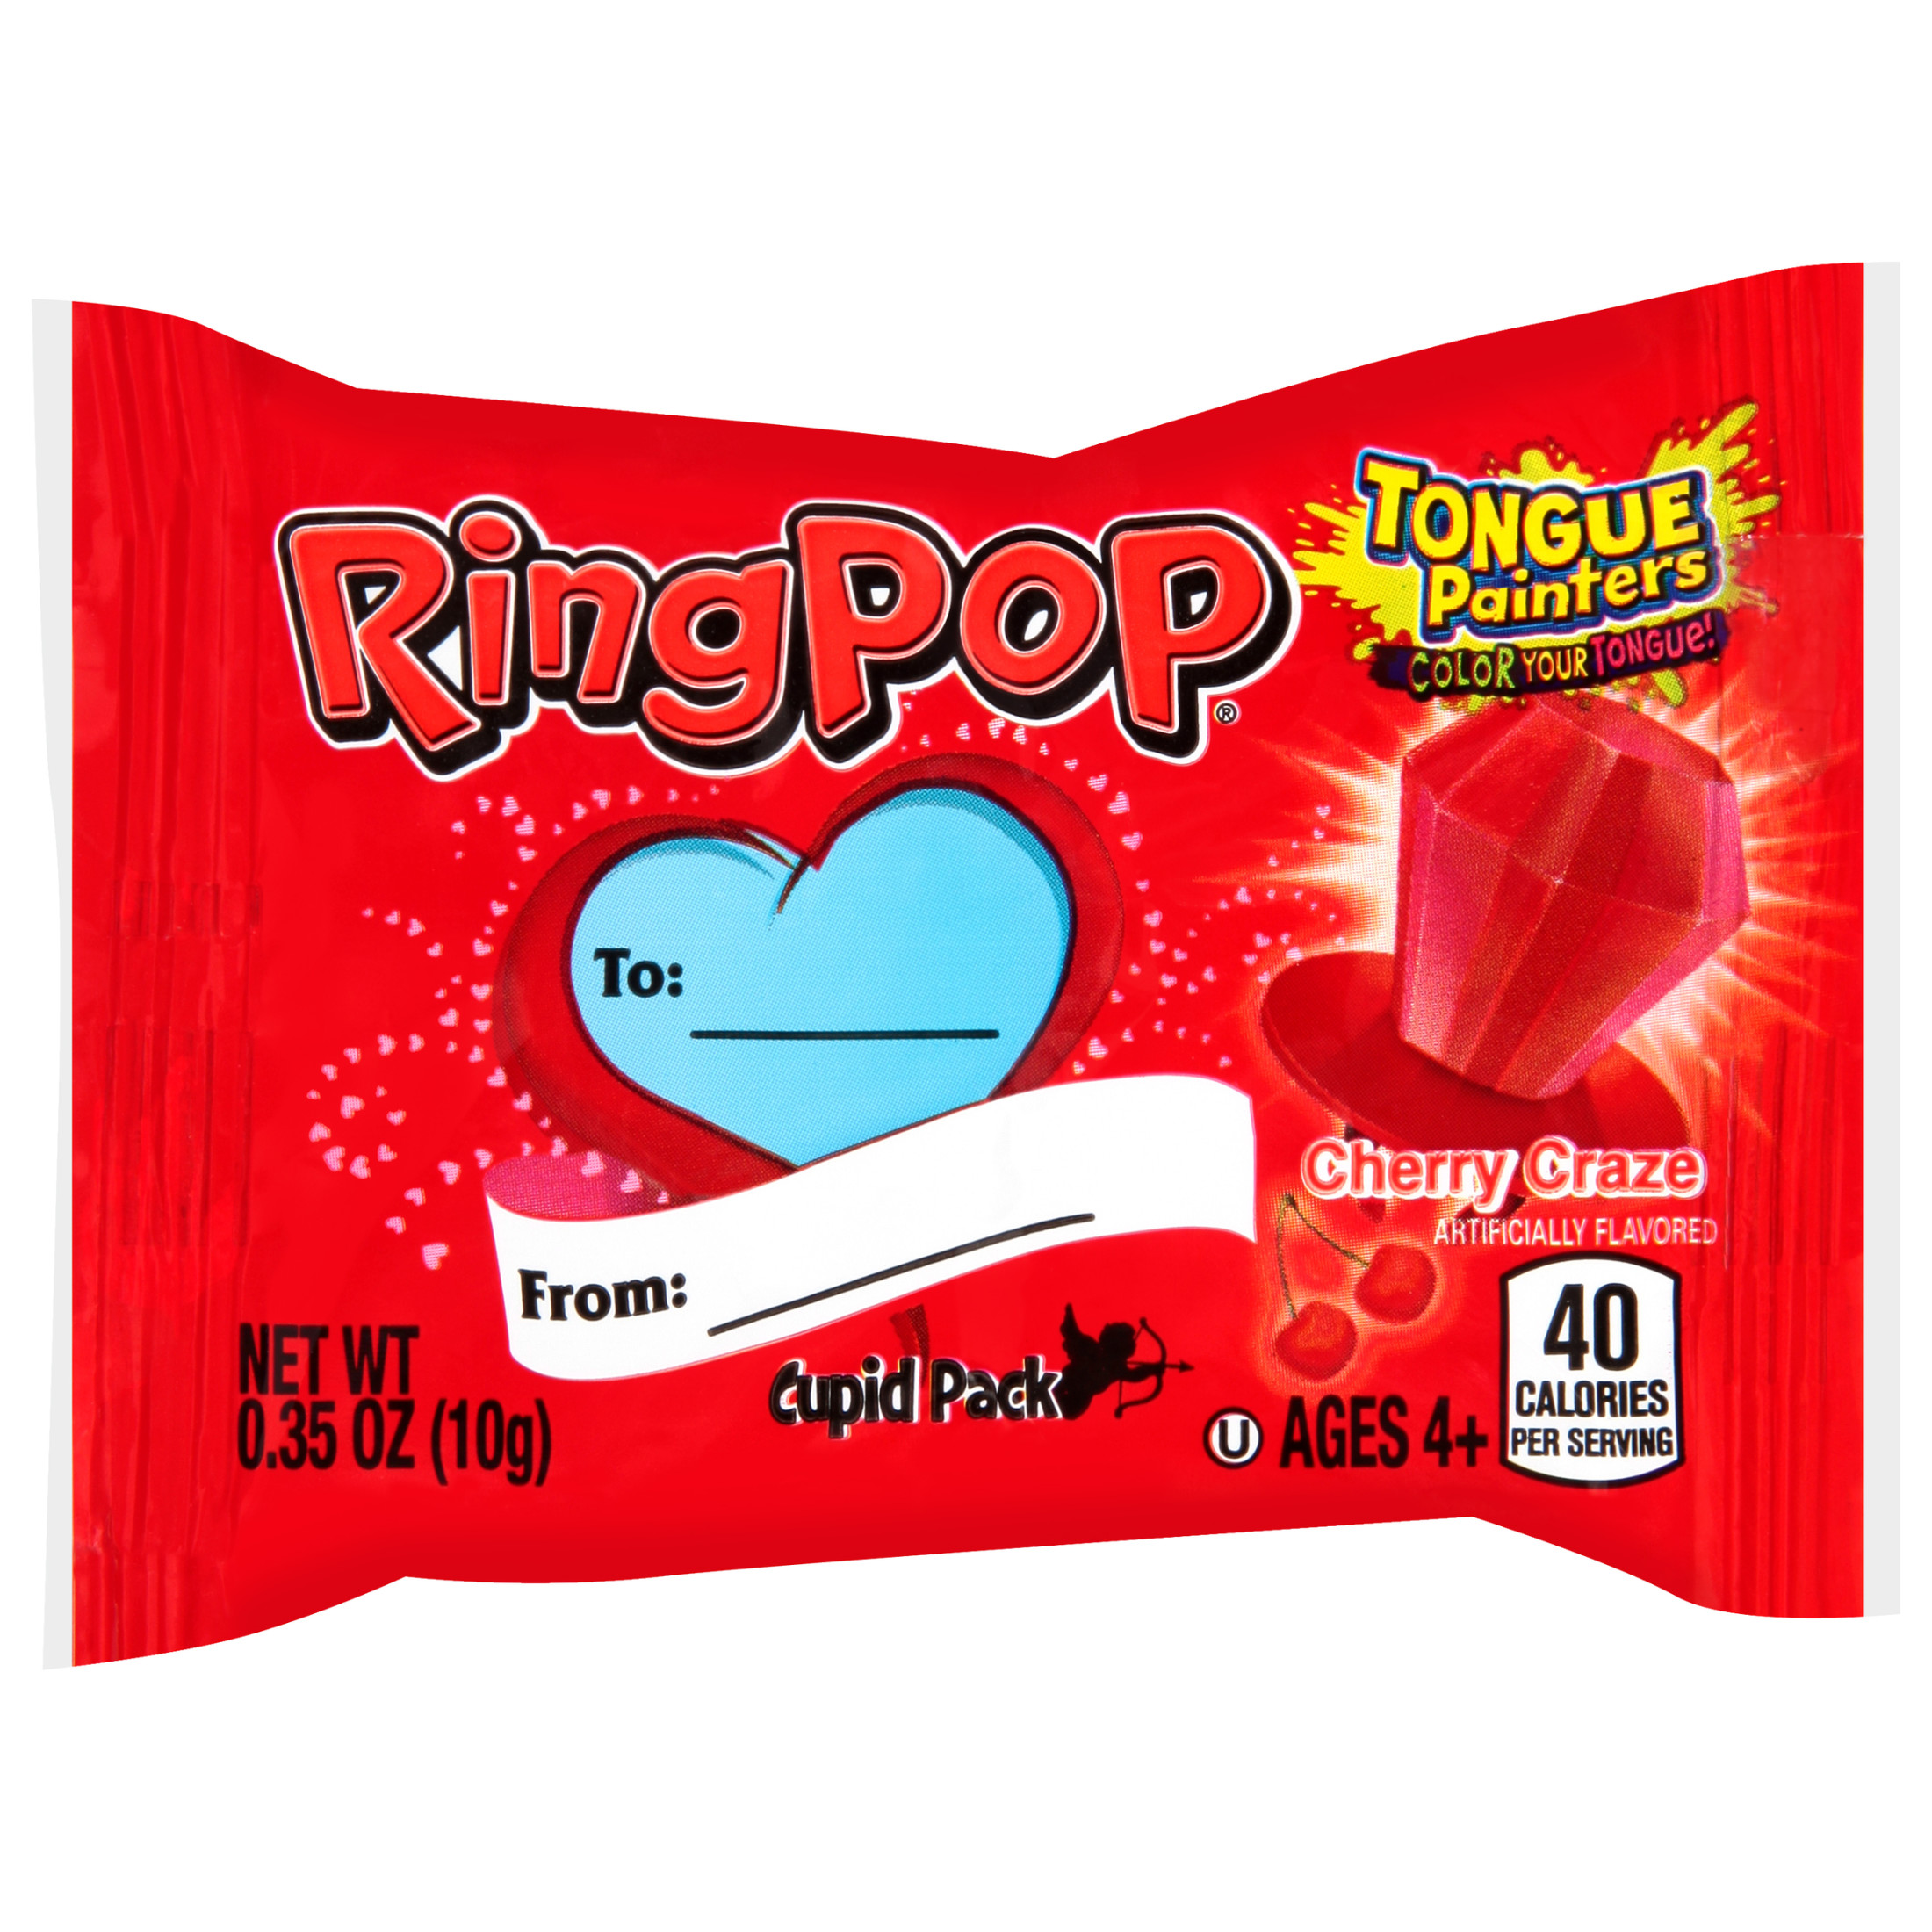 Ring Pop Valentine's Day Strawberry and Cherry Craze Lollipop Classroom Exchange Card (package), 3 Lollipops - image 4 of 8